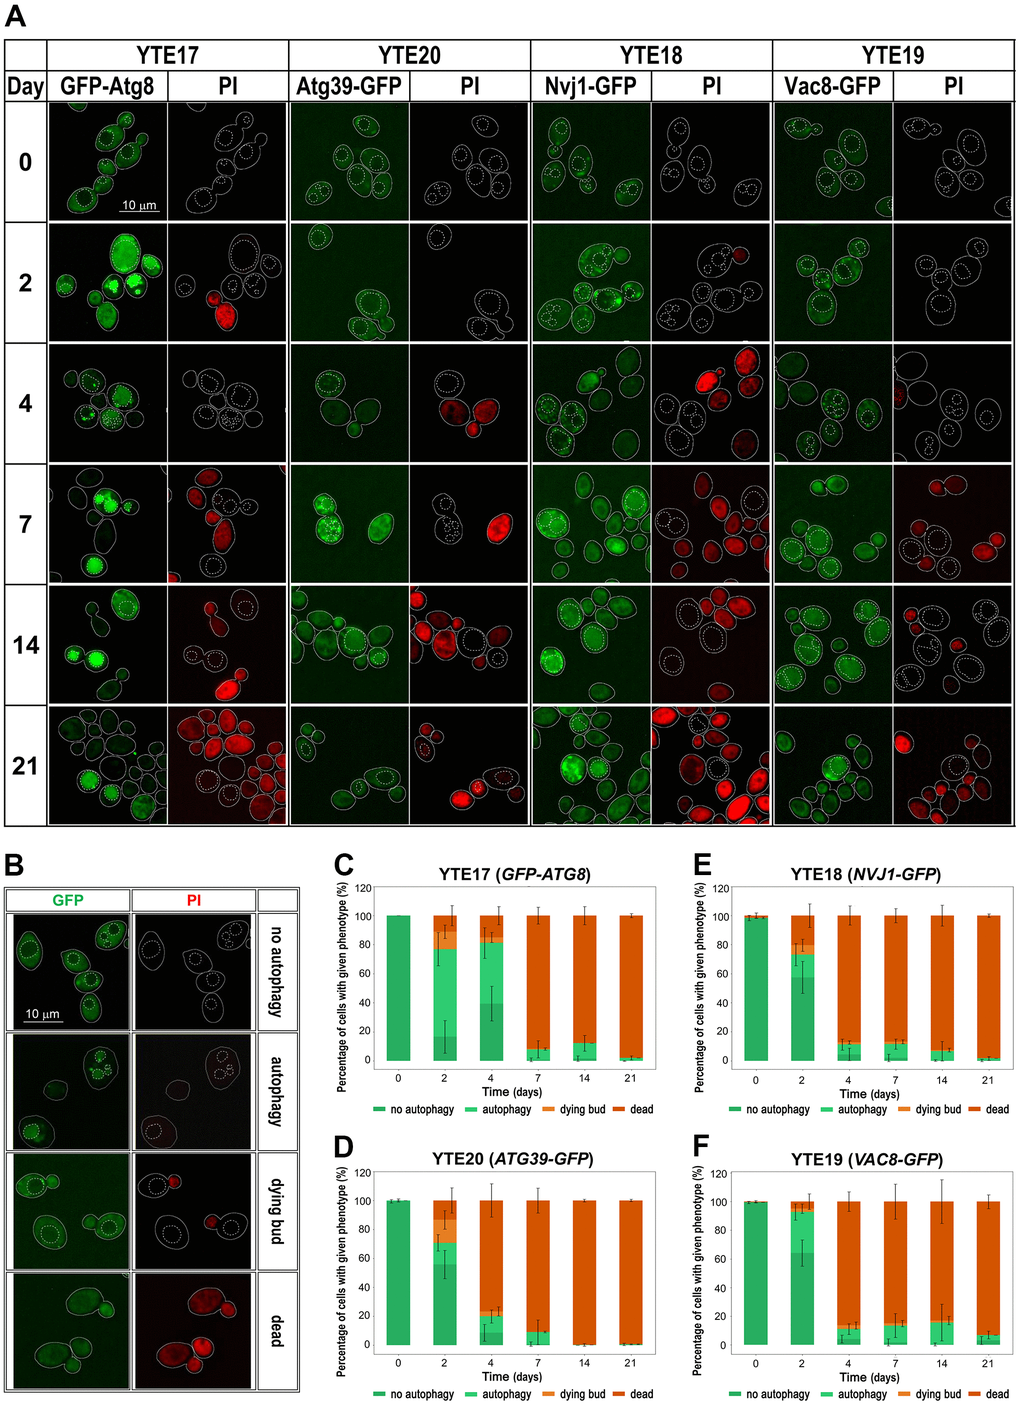 Changes in the autophagy markers’ localization during chronological aging. (A) Microscopic analysis of strains carrying fluorescently tagged autophagy markers: YTE17 (GFP-ATG8), YTE20 (ATG39-GFP), YTE18 (NVJ1-GFP), and YTE19 (VAC8-GFP) in a given day of CLS experiment. Examples shown in (A) are focused on cells that were still viable at the analyzed time point. The microscopic images were collected and processed under the same conditions, so the differences in signal intensity are veritable. Cell borders are marked with solid lines, and vacuole outlines, determined based on CMAC staining, are marked with a dashed line. (B) Categories of counted phenotypes - examples. (C–F) The microscopic results quantification is shown as a percentage of cells presenting a given phenotype in the population from a specific time point. Three biological repetitions were performed; in each, at least 300 cells were analyzed for every time point. Graphs show the mean of all biological repetitions; whiskers represent standard deviations. Results obtained for YTE17 (GFP-ATG8) (C), YTE20 (ATG39-GFP) (D), YTE18 (NVJ1-GFP) (E), and YTE19 (VAC8-GFP) (F) are shown.